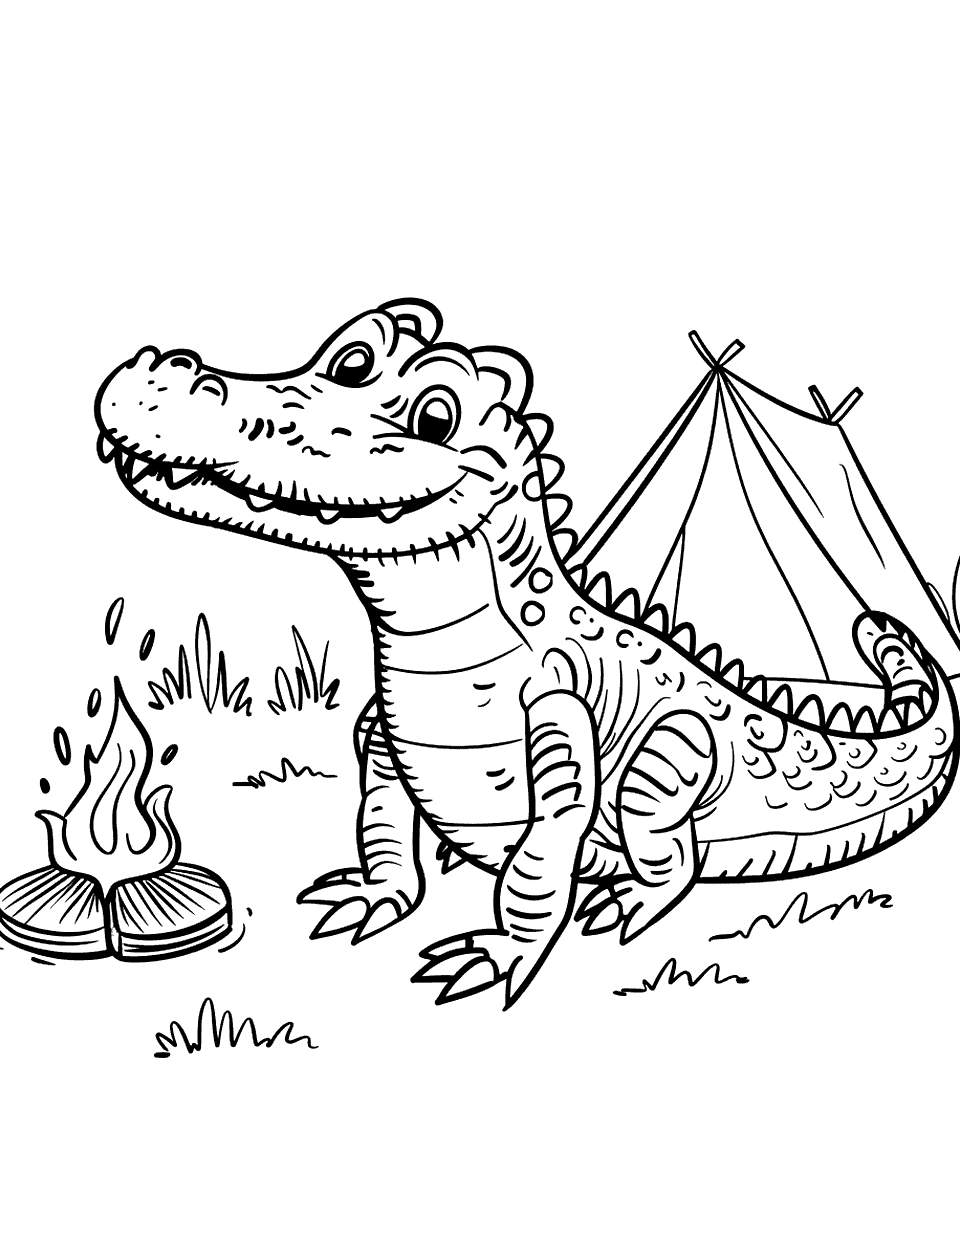 Alligator Going Camping Coloring Page - An alligator sitting by a campfire with a tent in the background.